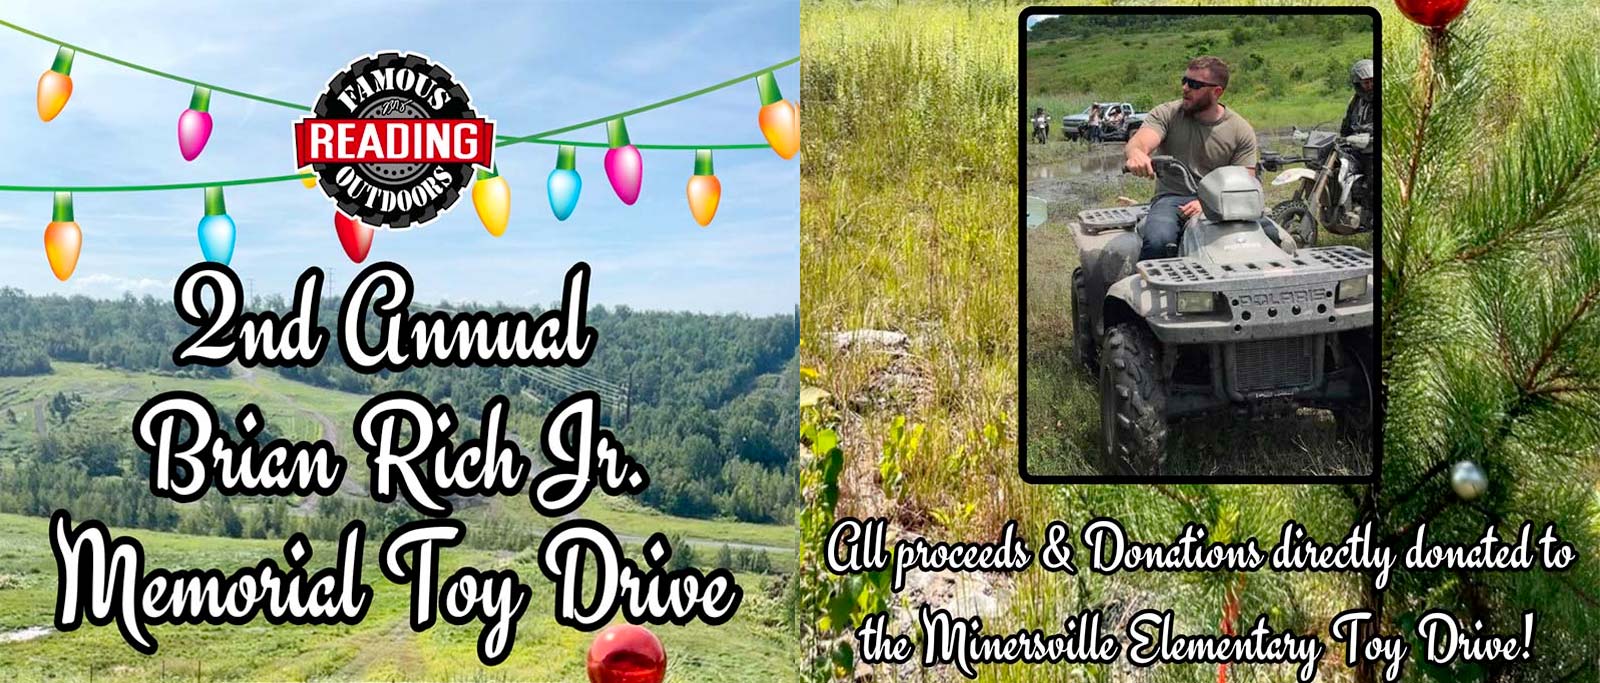 2nd Annual Brian Rich Jr. Memorial Toy Ride on Saturday or Sunday (November 18th & 19th) at the Darkwater Trail System ONLY